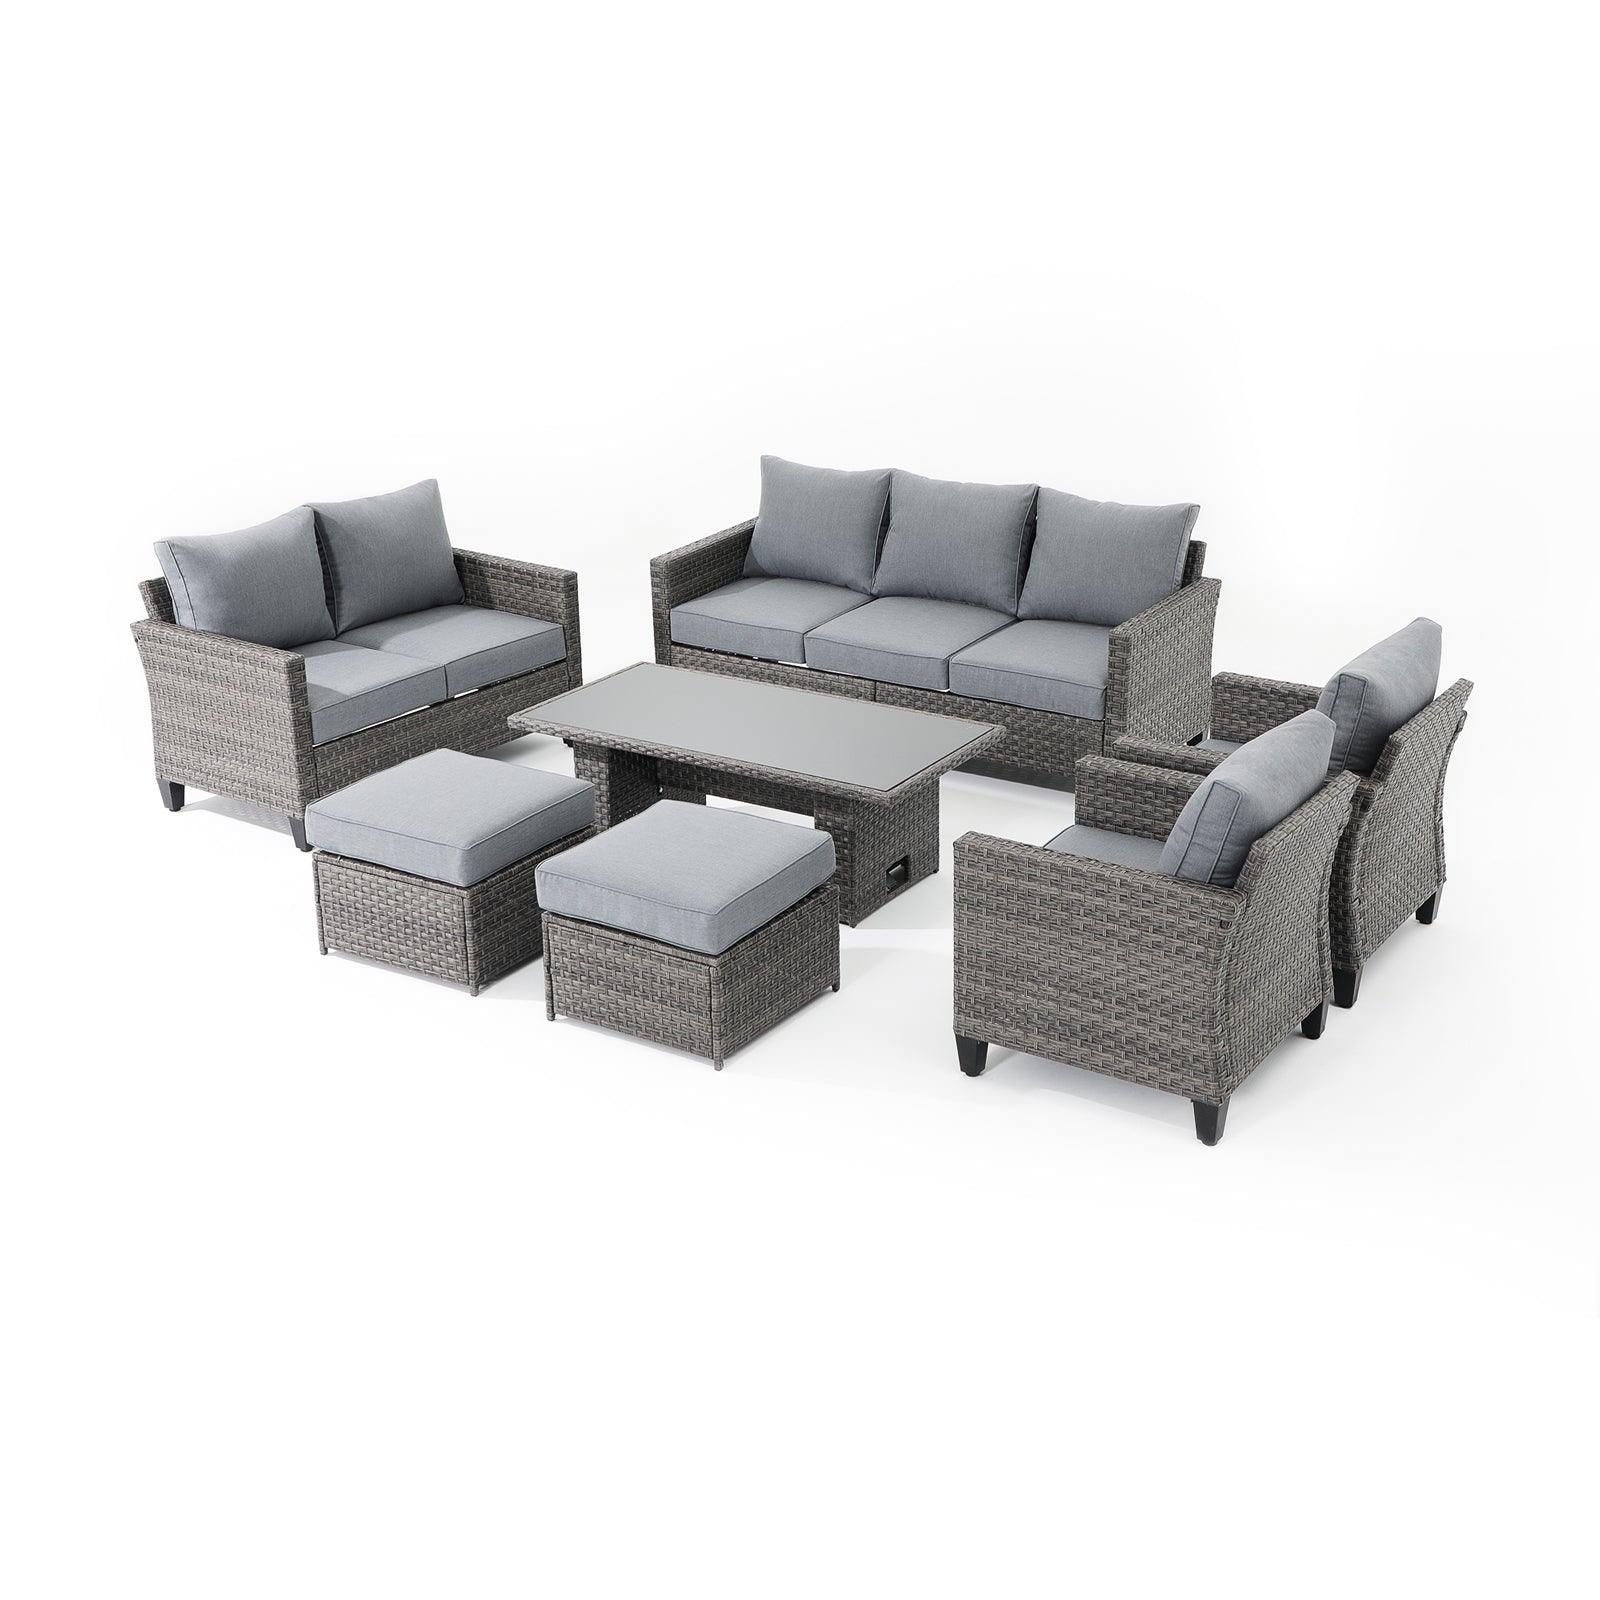 Ayia 7-Piece Grey outdoor Sofa Set with Rattan design, grey cushions, a 3-seater sofa, 2 arm chairs , 2 ottomans, 1 loveseat, multifunctional outdoor table, left angle- Jardina Furniture #color_Grey#piece_7-pc. with ottomans & Table